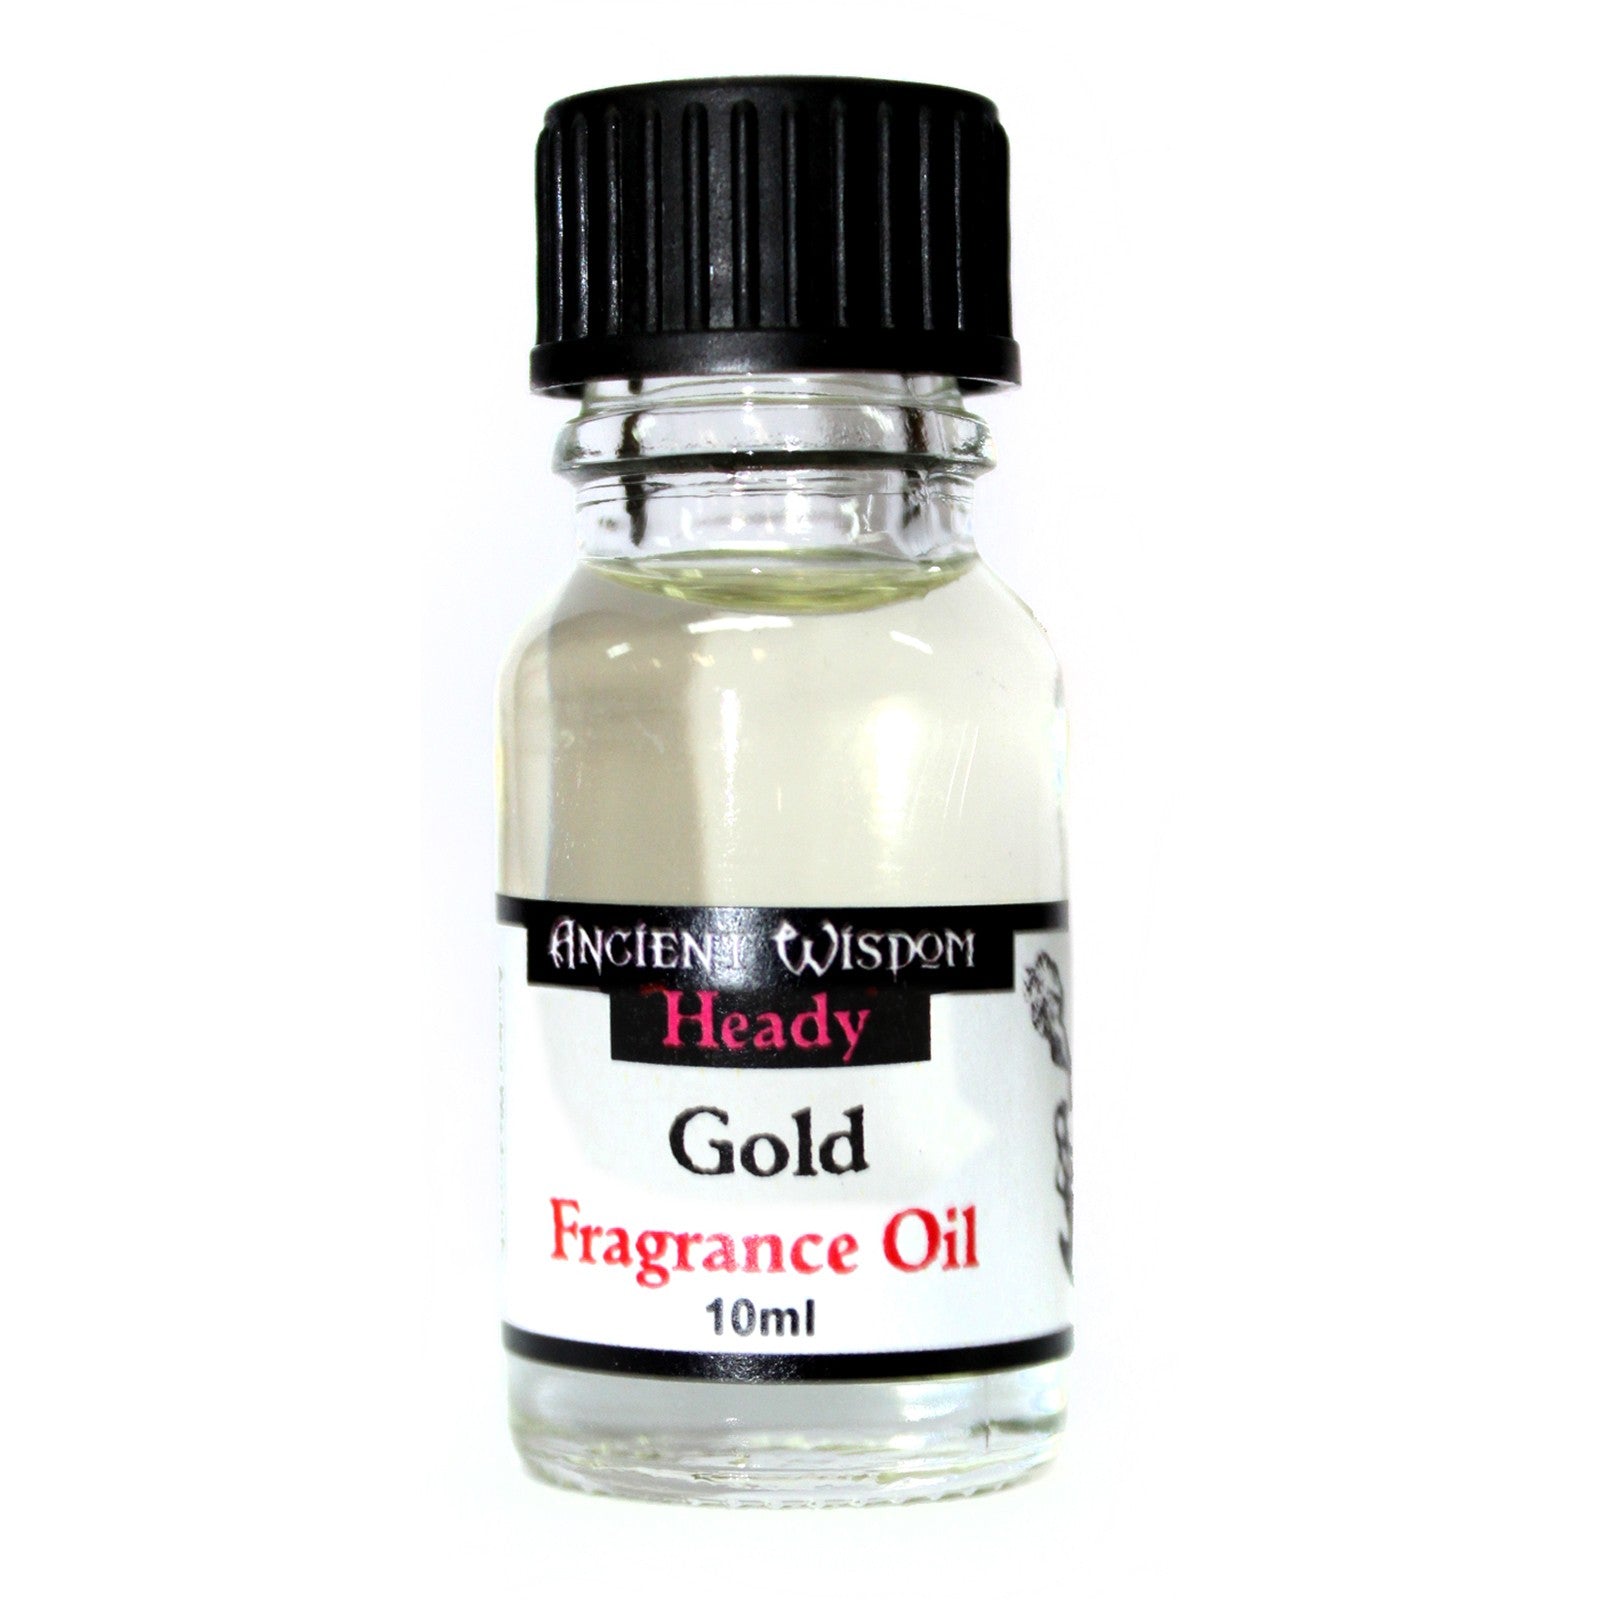 View 10ml Gold Fragrance Oil information